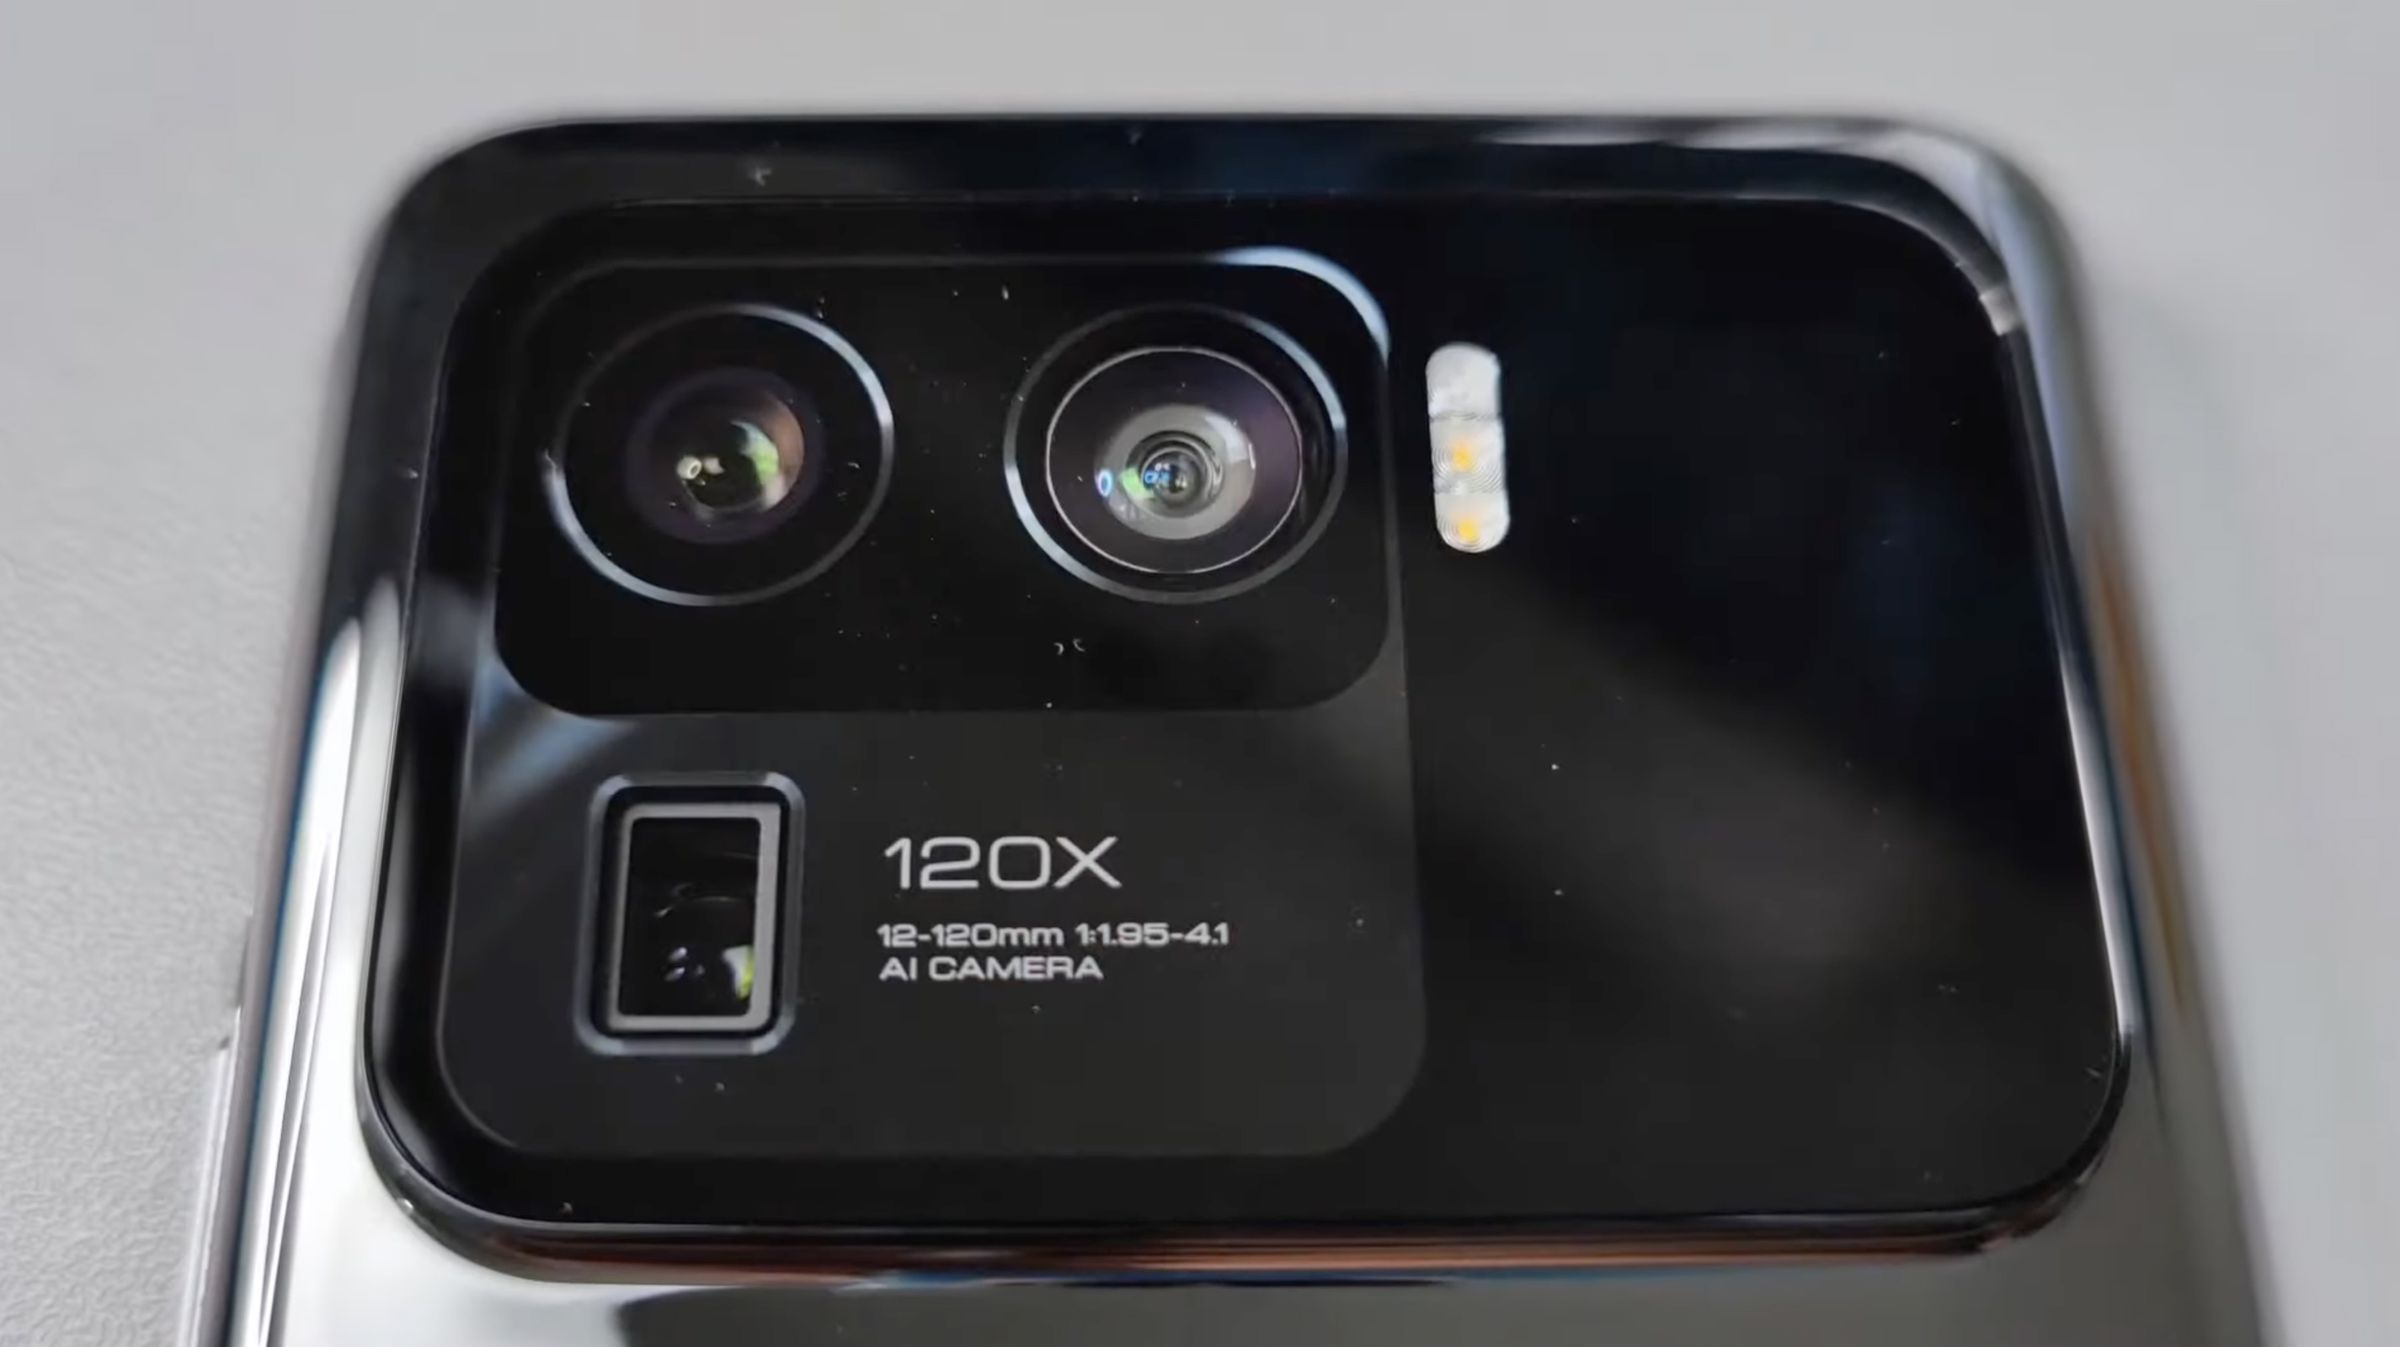 The device shows three cameras, including a periscope-style lens with 120x hybrid zoom.